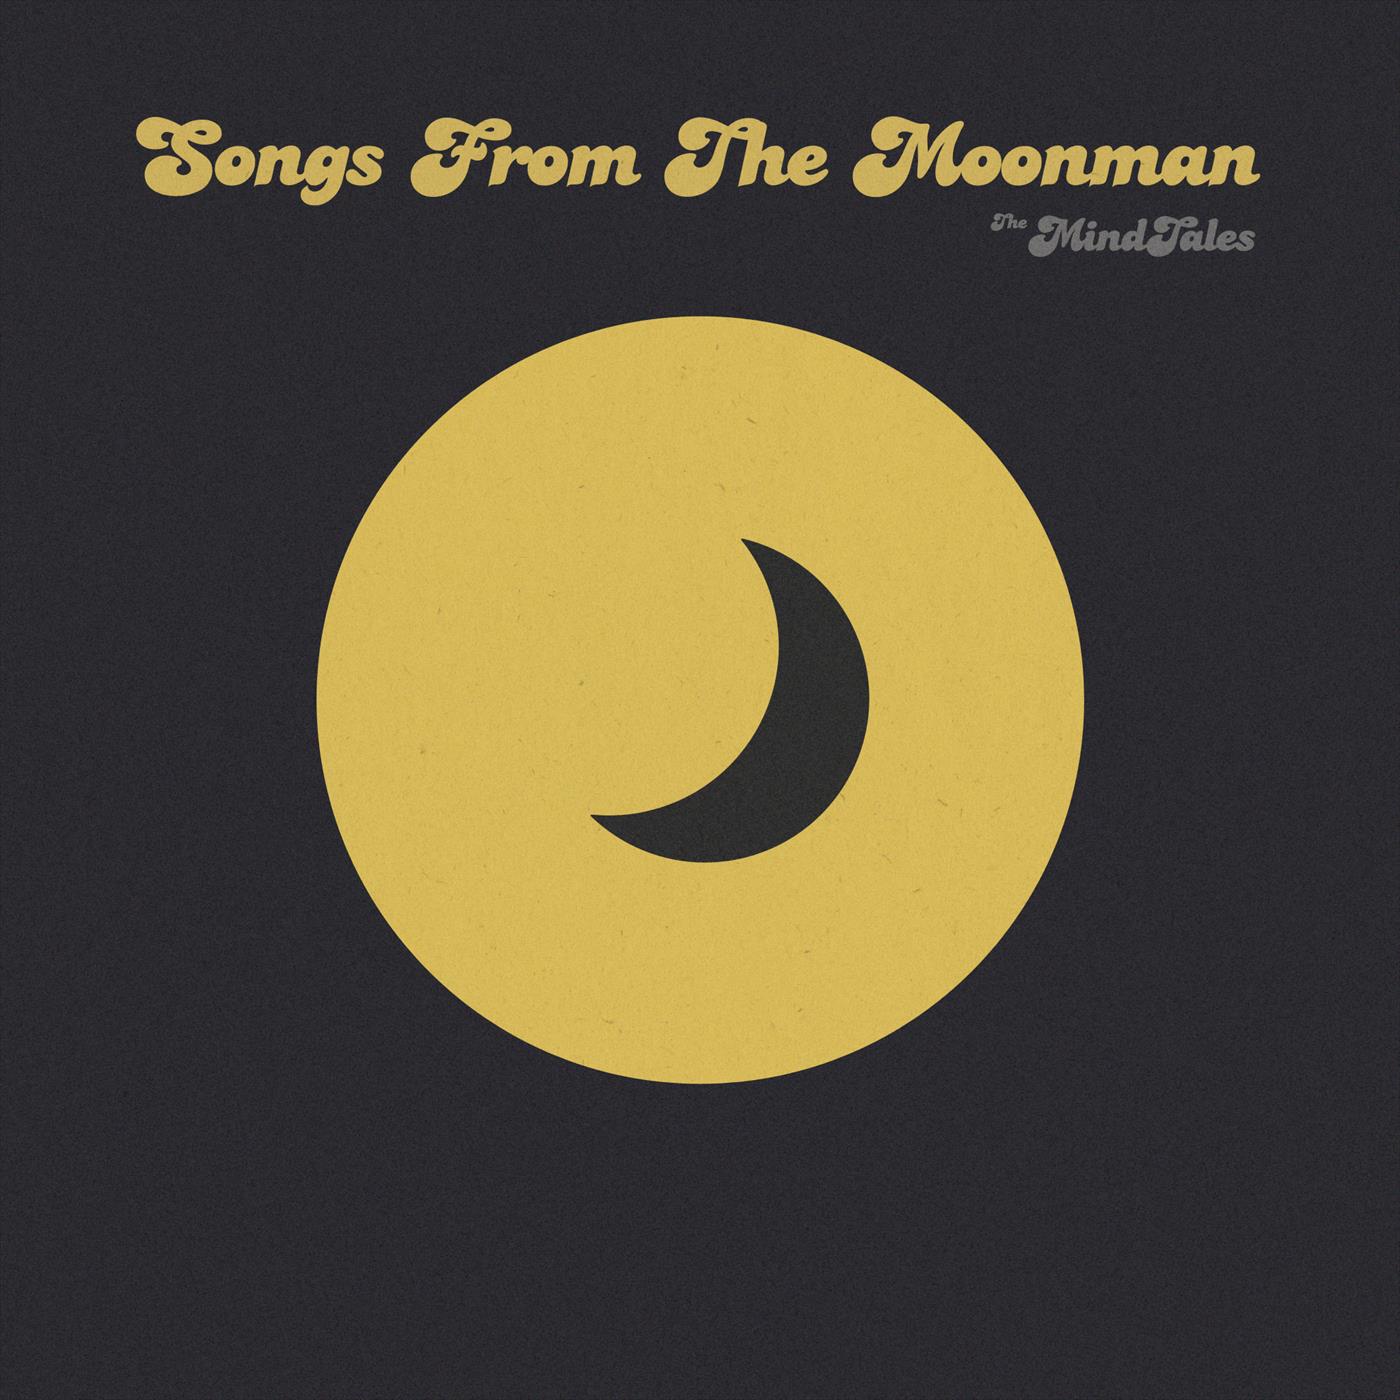 Songs From The Moonman